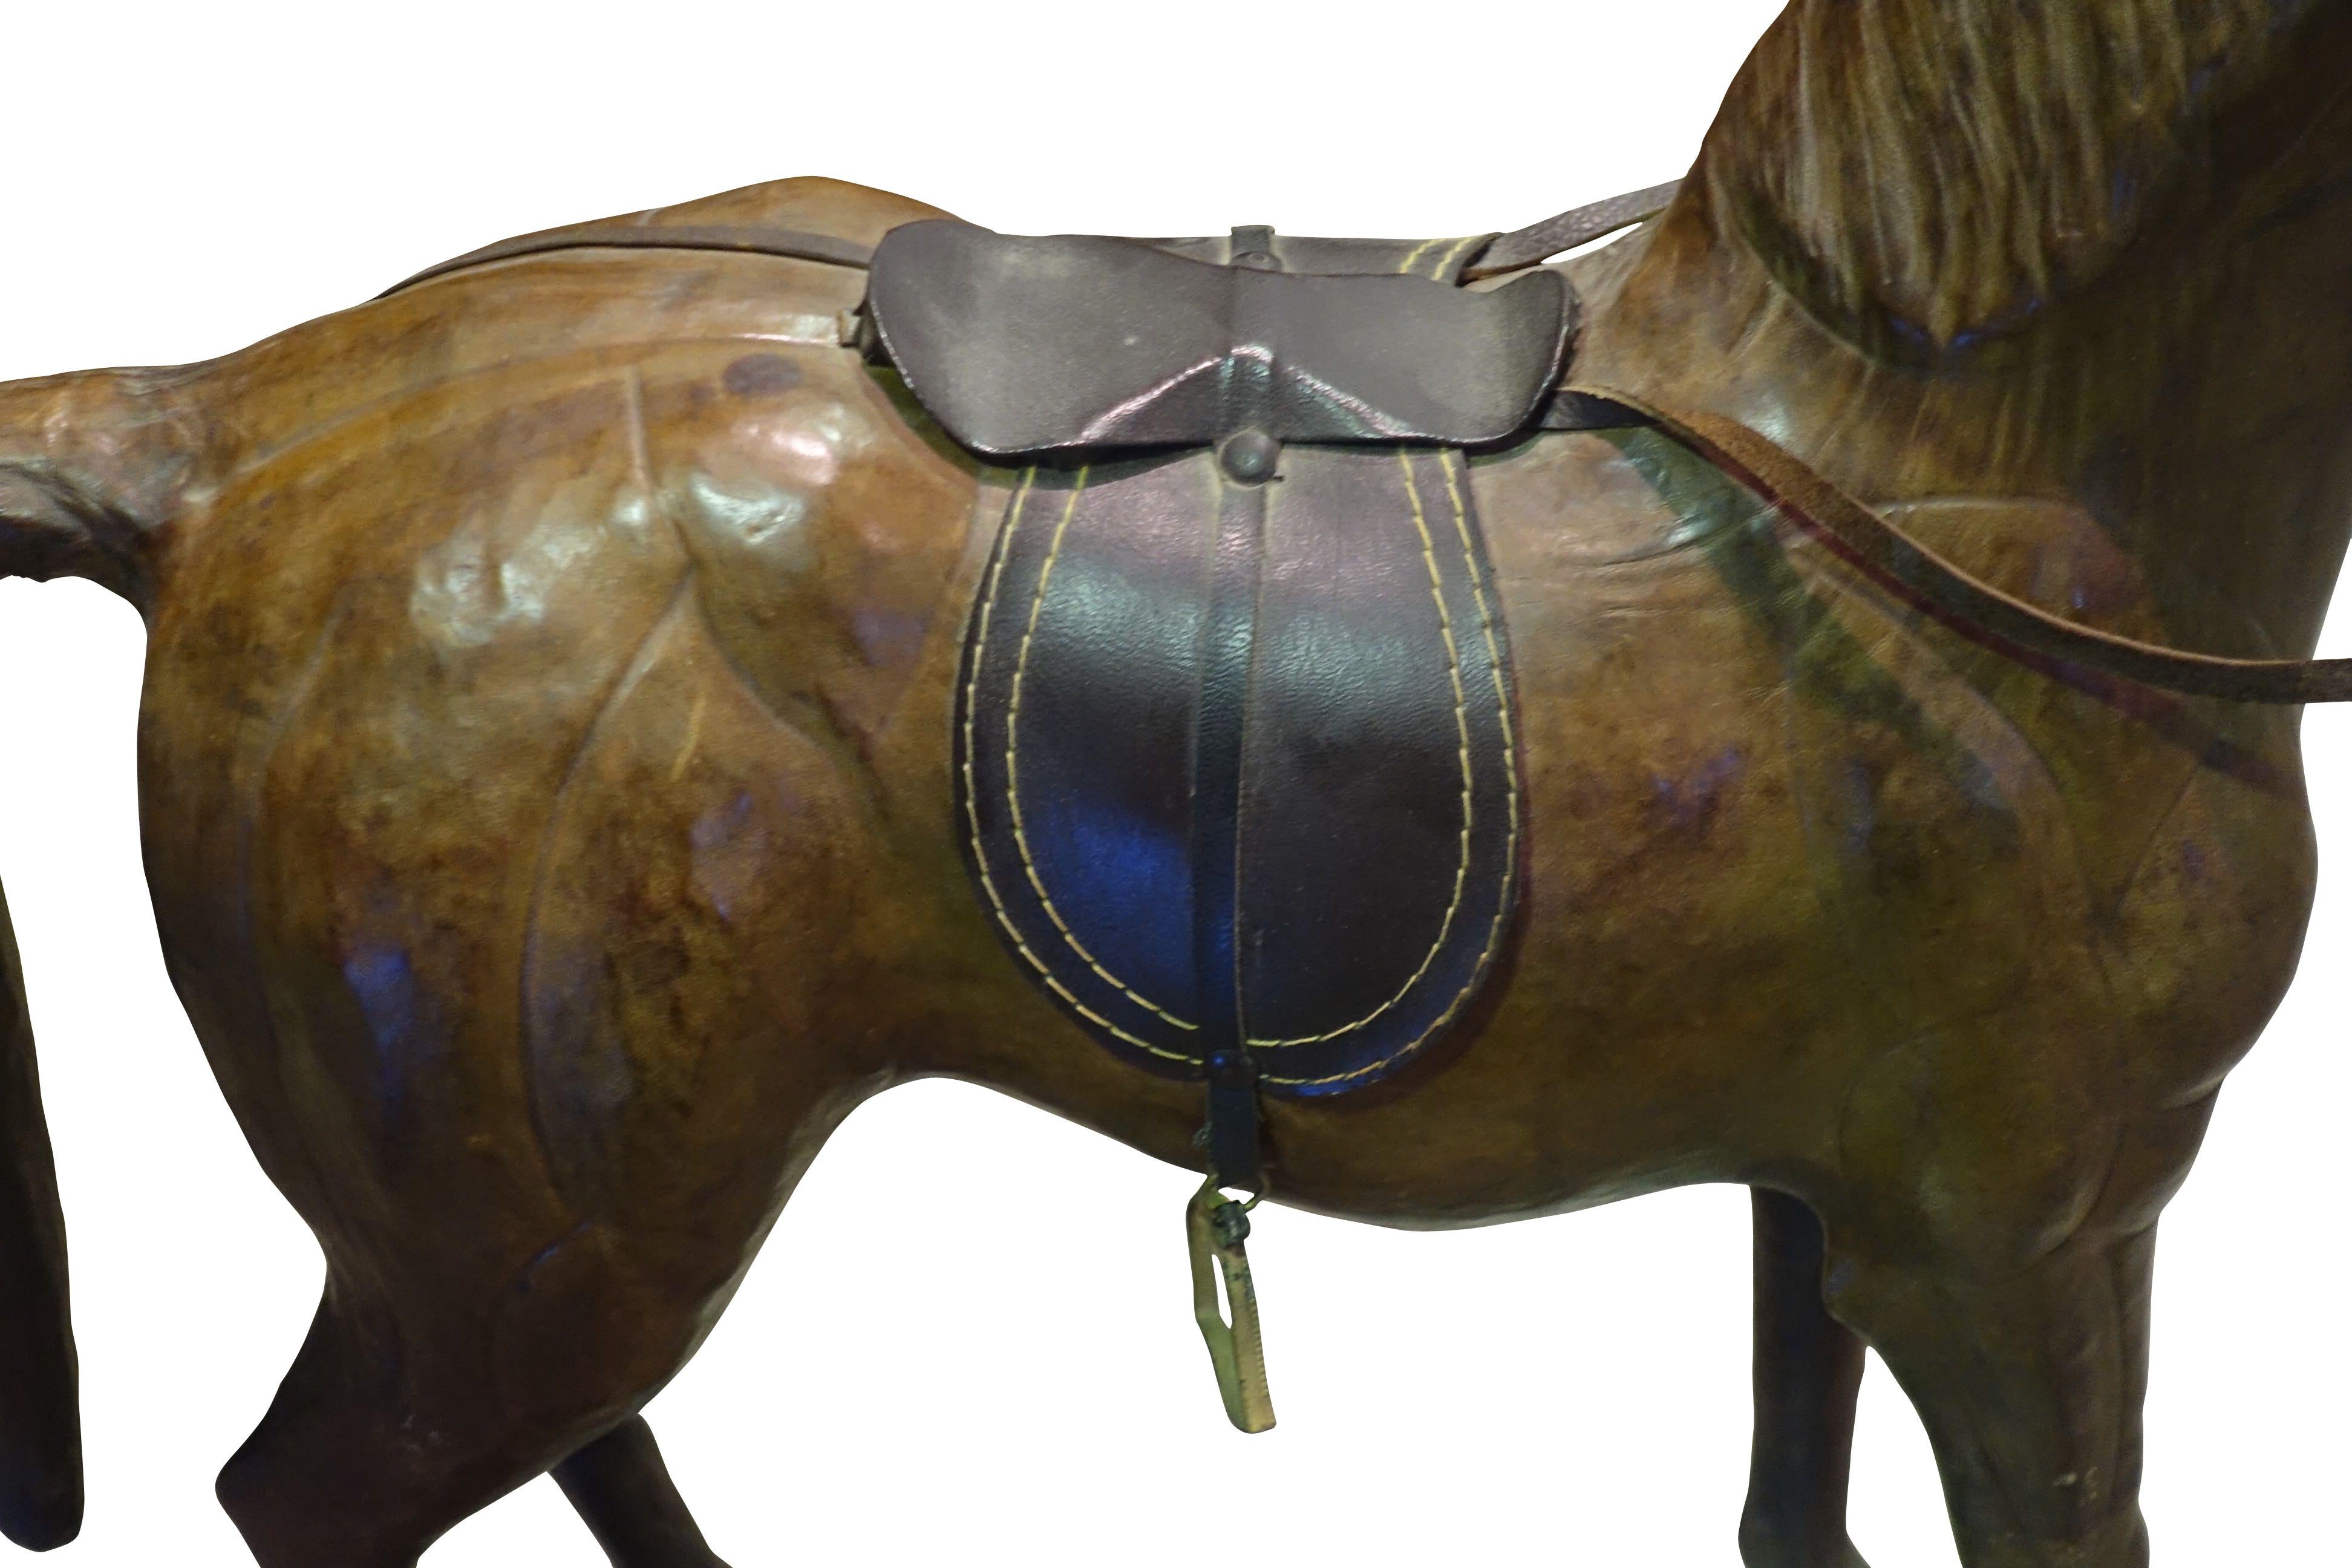 This figure of a wooden horse is completely covered in brown leather.
Exacting details of the decorative saddle and reins.  The green glass eyes are a welcome surprise against the dark brown body with black accents.
Sculpted muscle details enhance